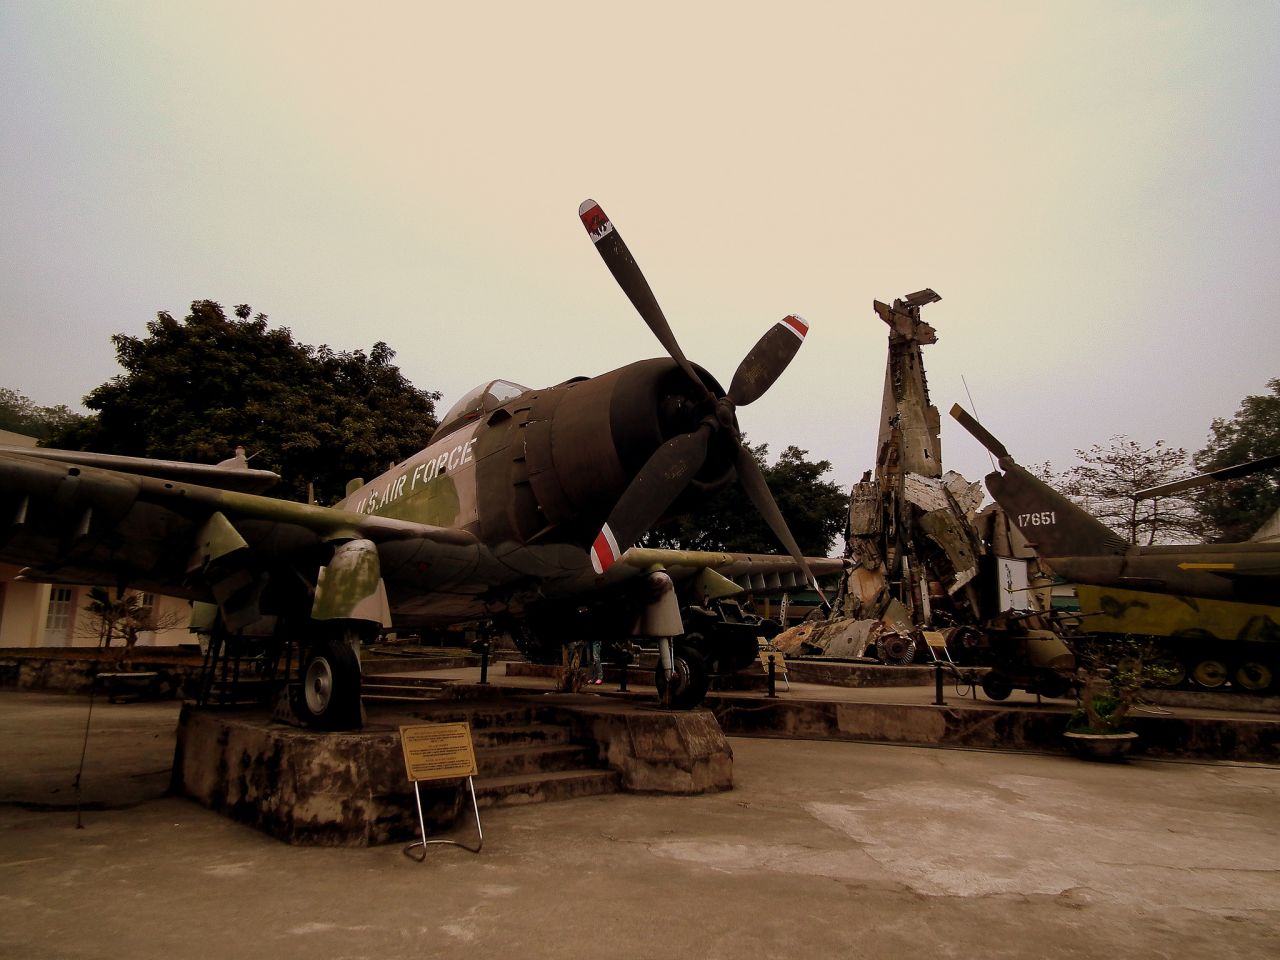 Relics from the Vietnam War at the Vietnam Army Museum, Hanoi.